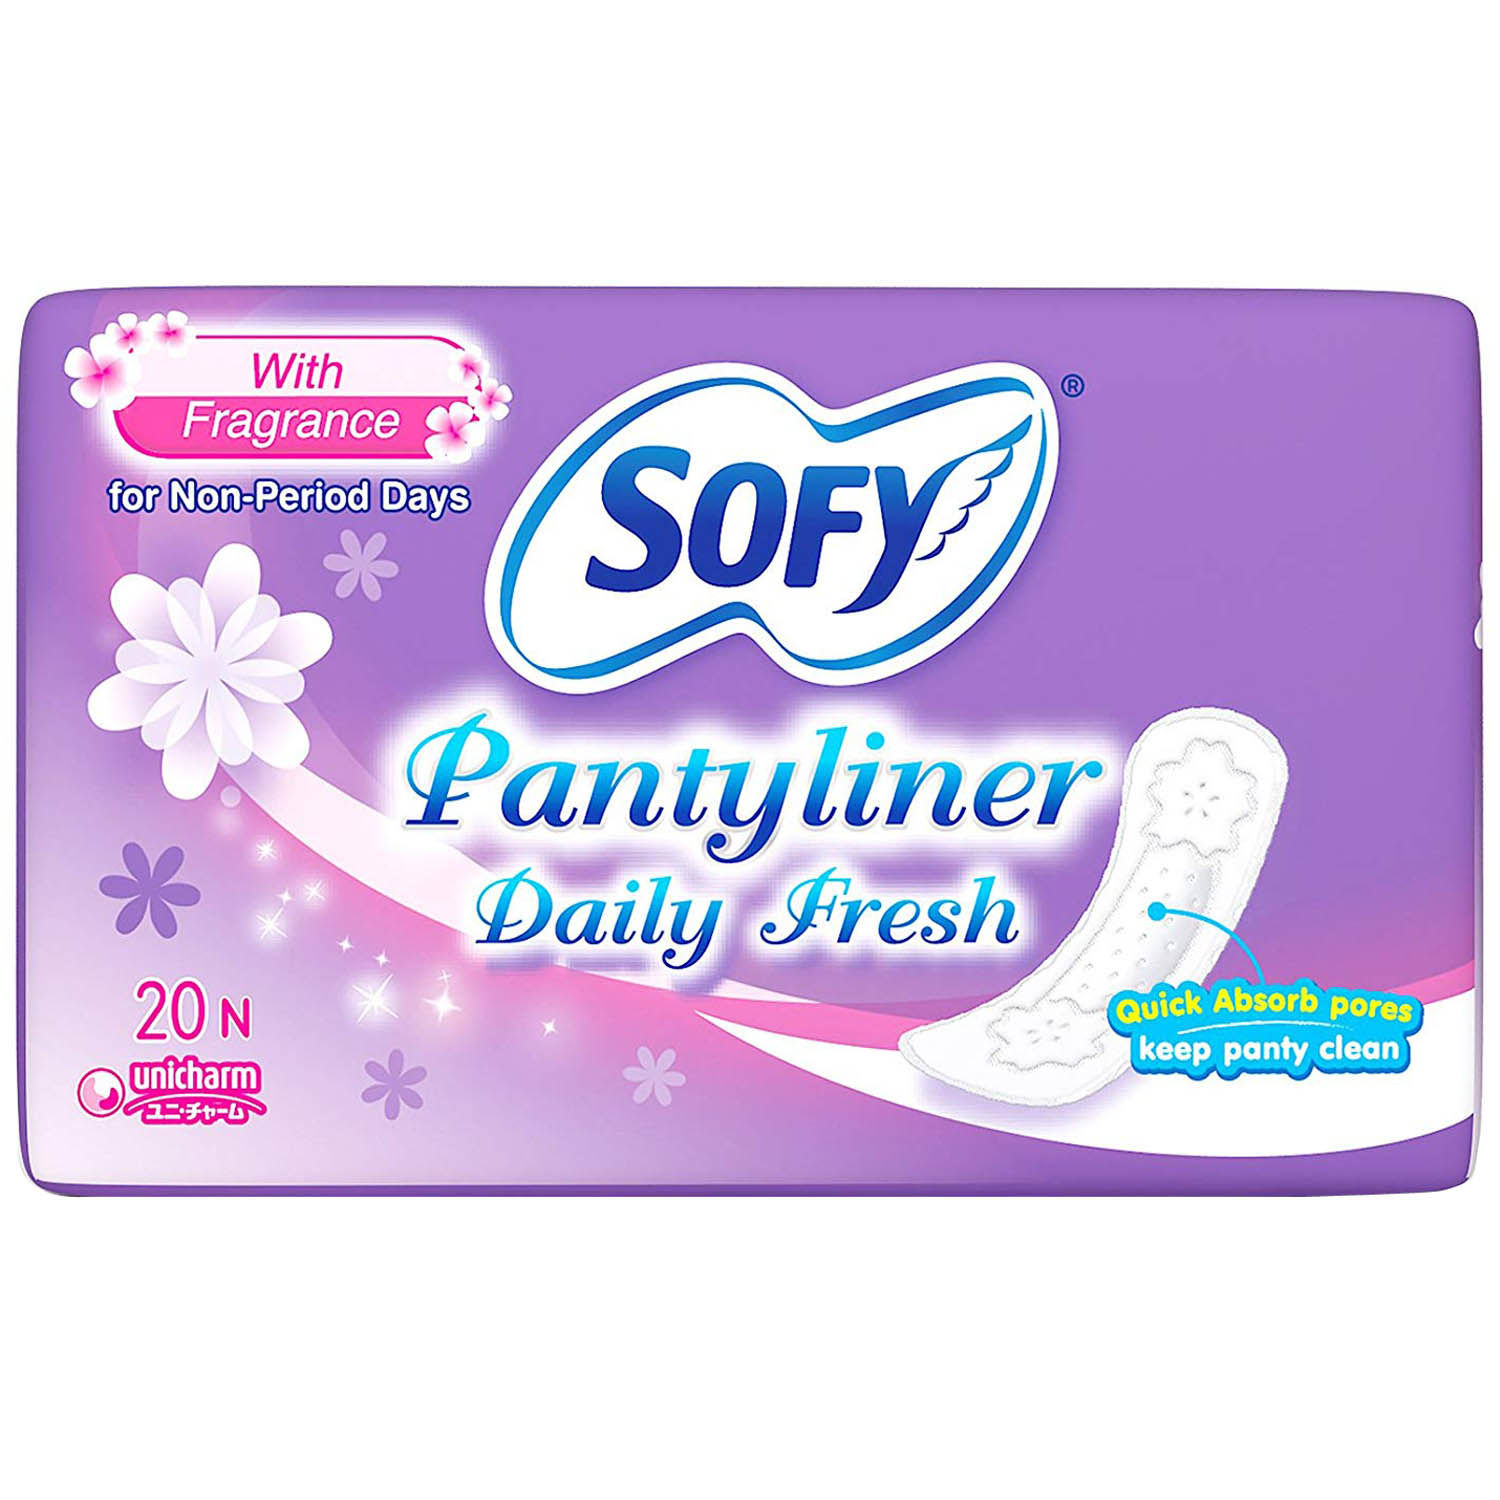 Buy Sofy Daily Fresh Pantyliner, 20 Count Online